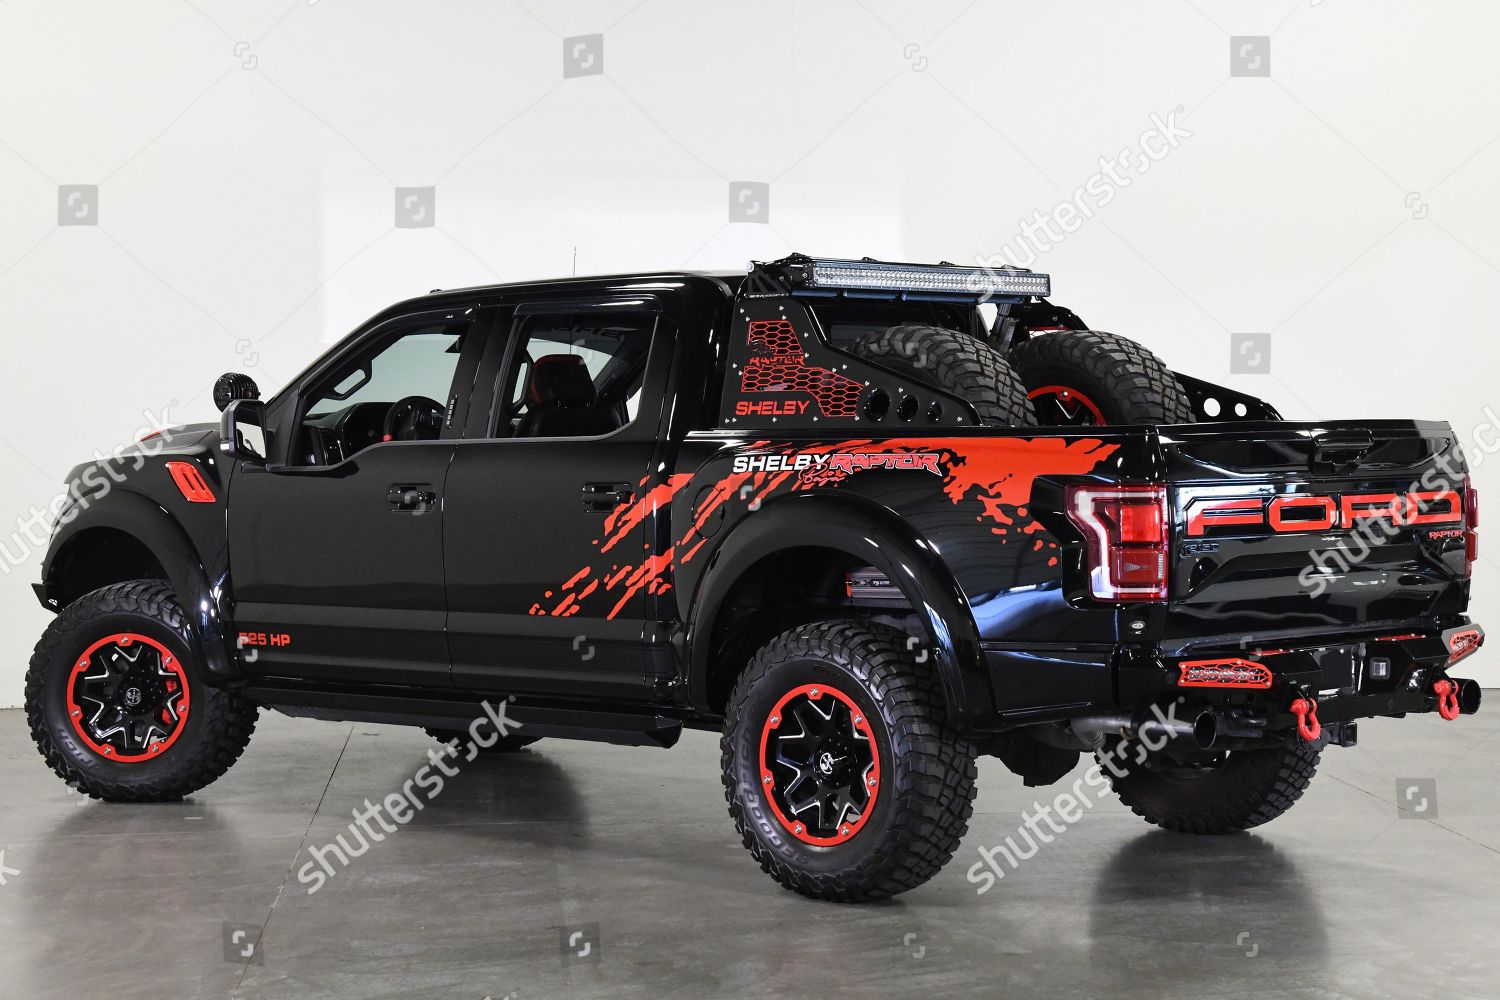 2018 Ford F150 Shelby Raptor Baja 525hp Editorial Stock